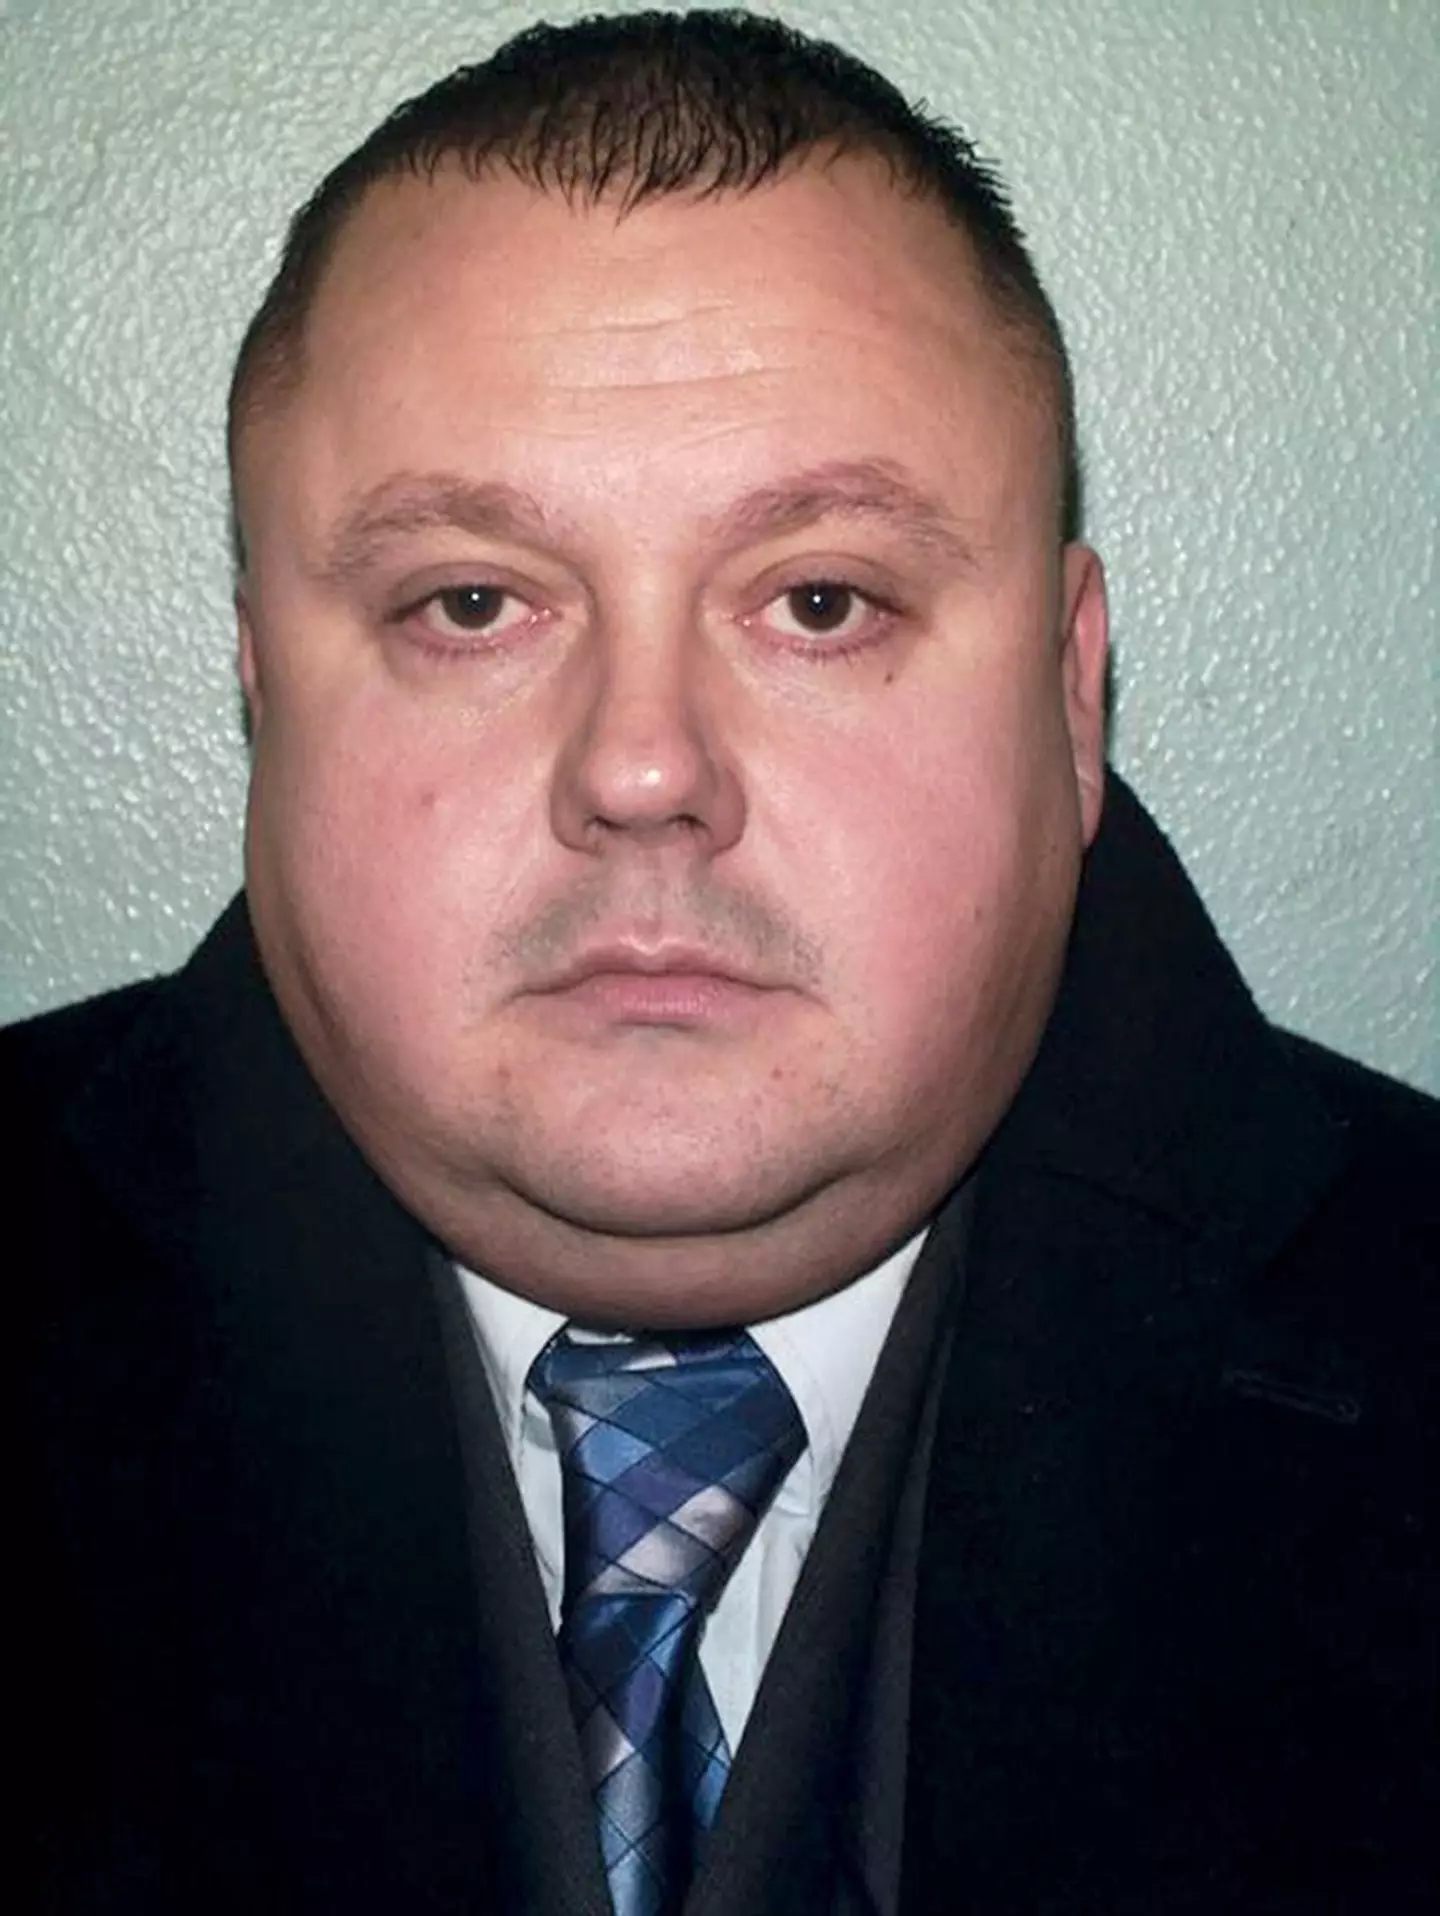 Serial killer Levi Bellfield - who is serving two life sentences - will be allowed to marry his girlfriend in prison.